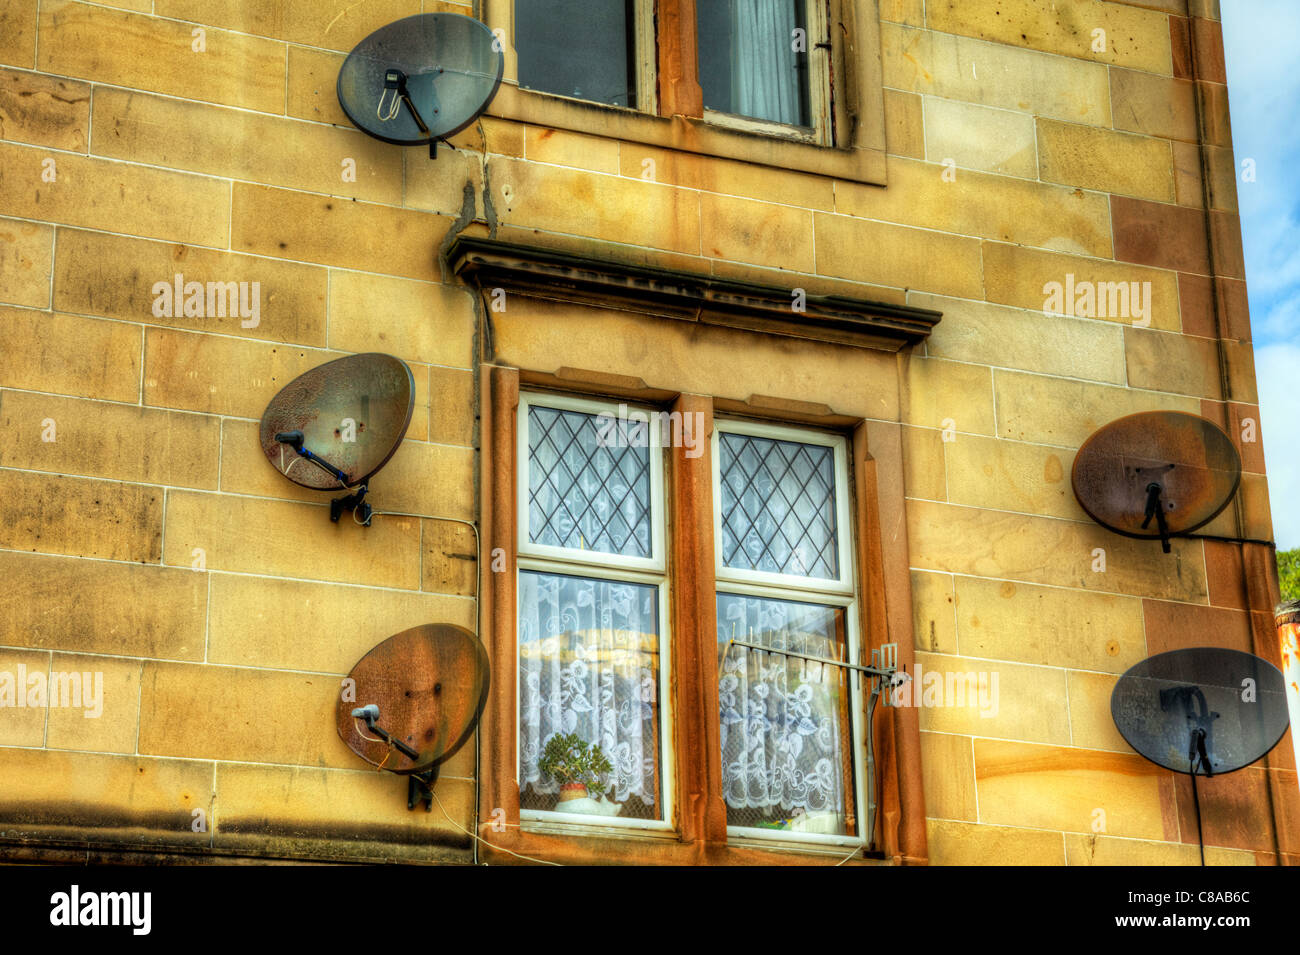 Oban, Scotland, building with large amount of satellite dishes for small area bskyb has window surrounded Stock Photo